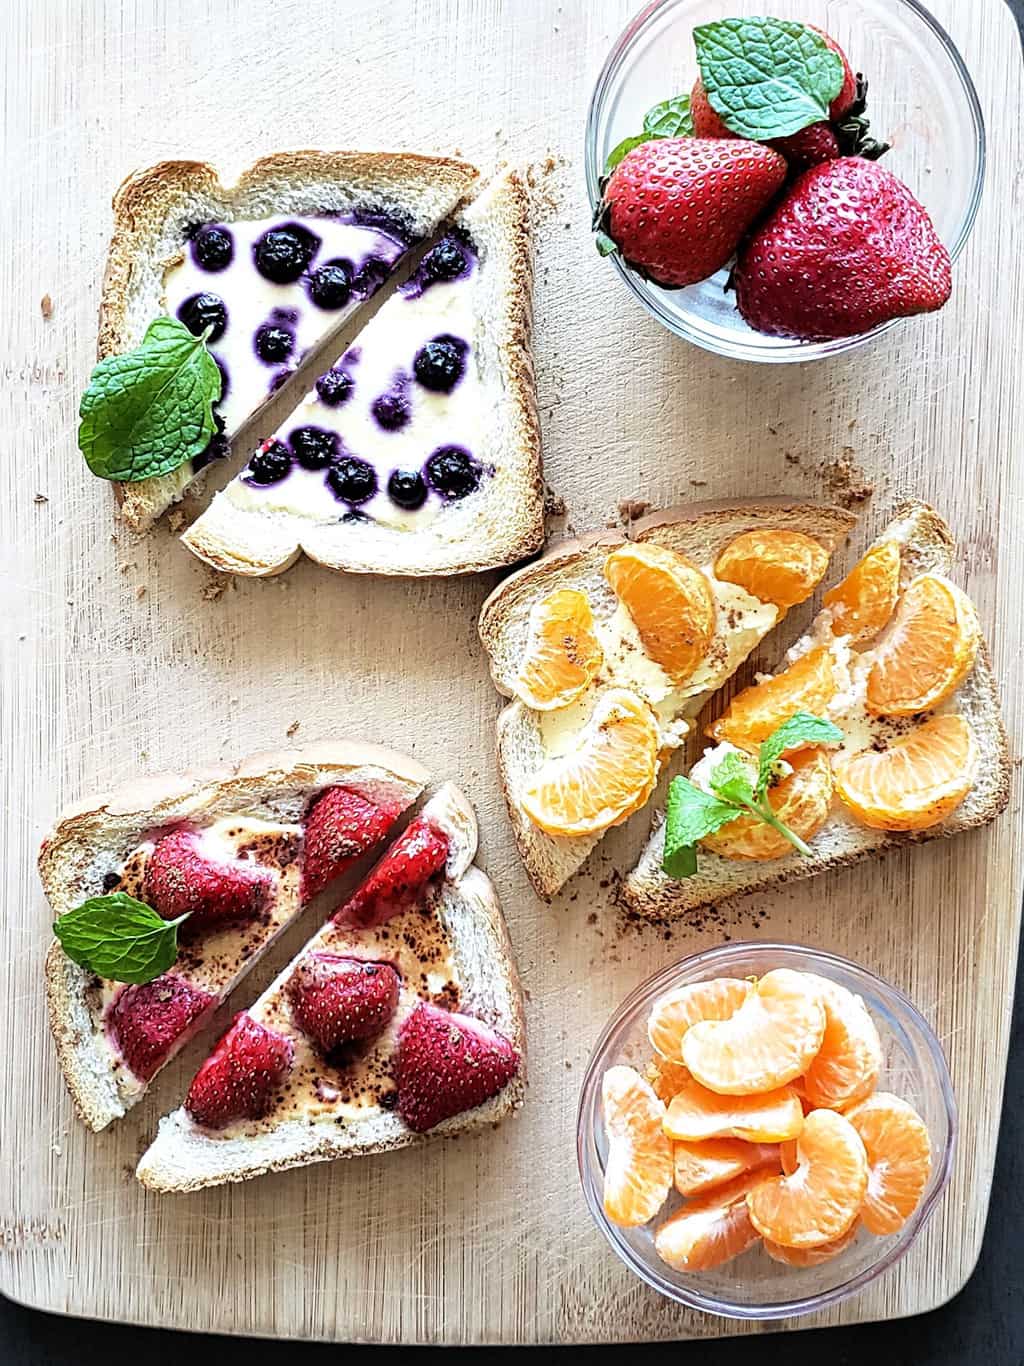 Six different tiktok toasts which are custard yogurt toasts served with different fruits and toppings.